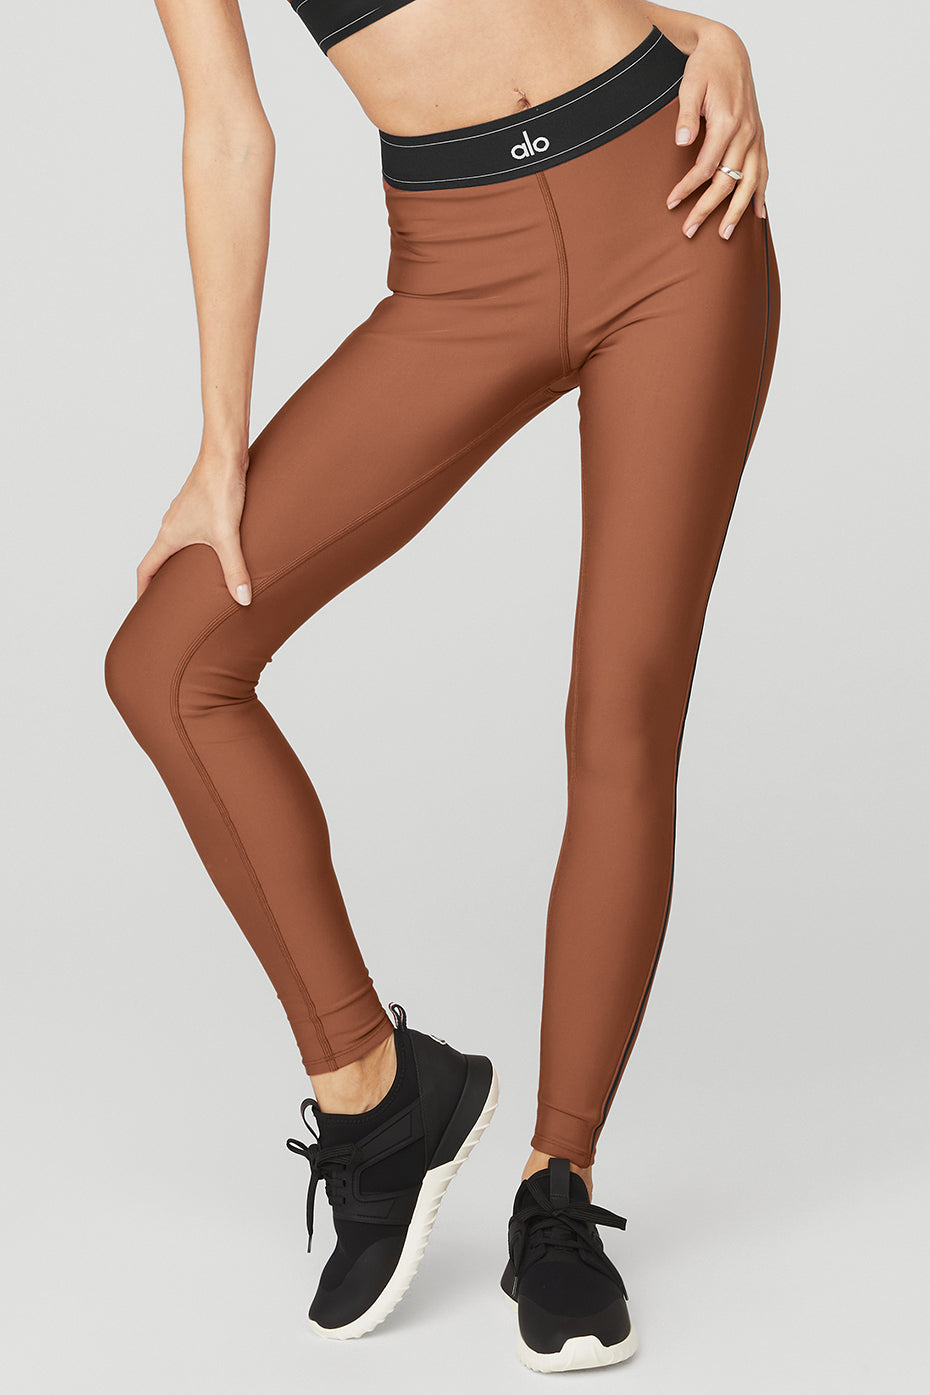 Airlift High-Waist Suit Up Legging in Rust by Alo Yoga